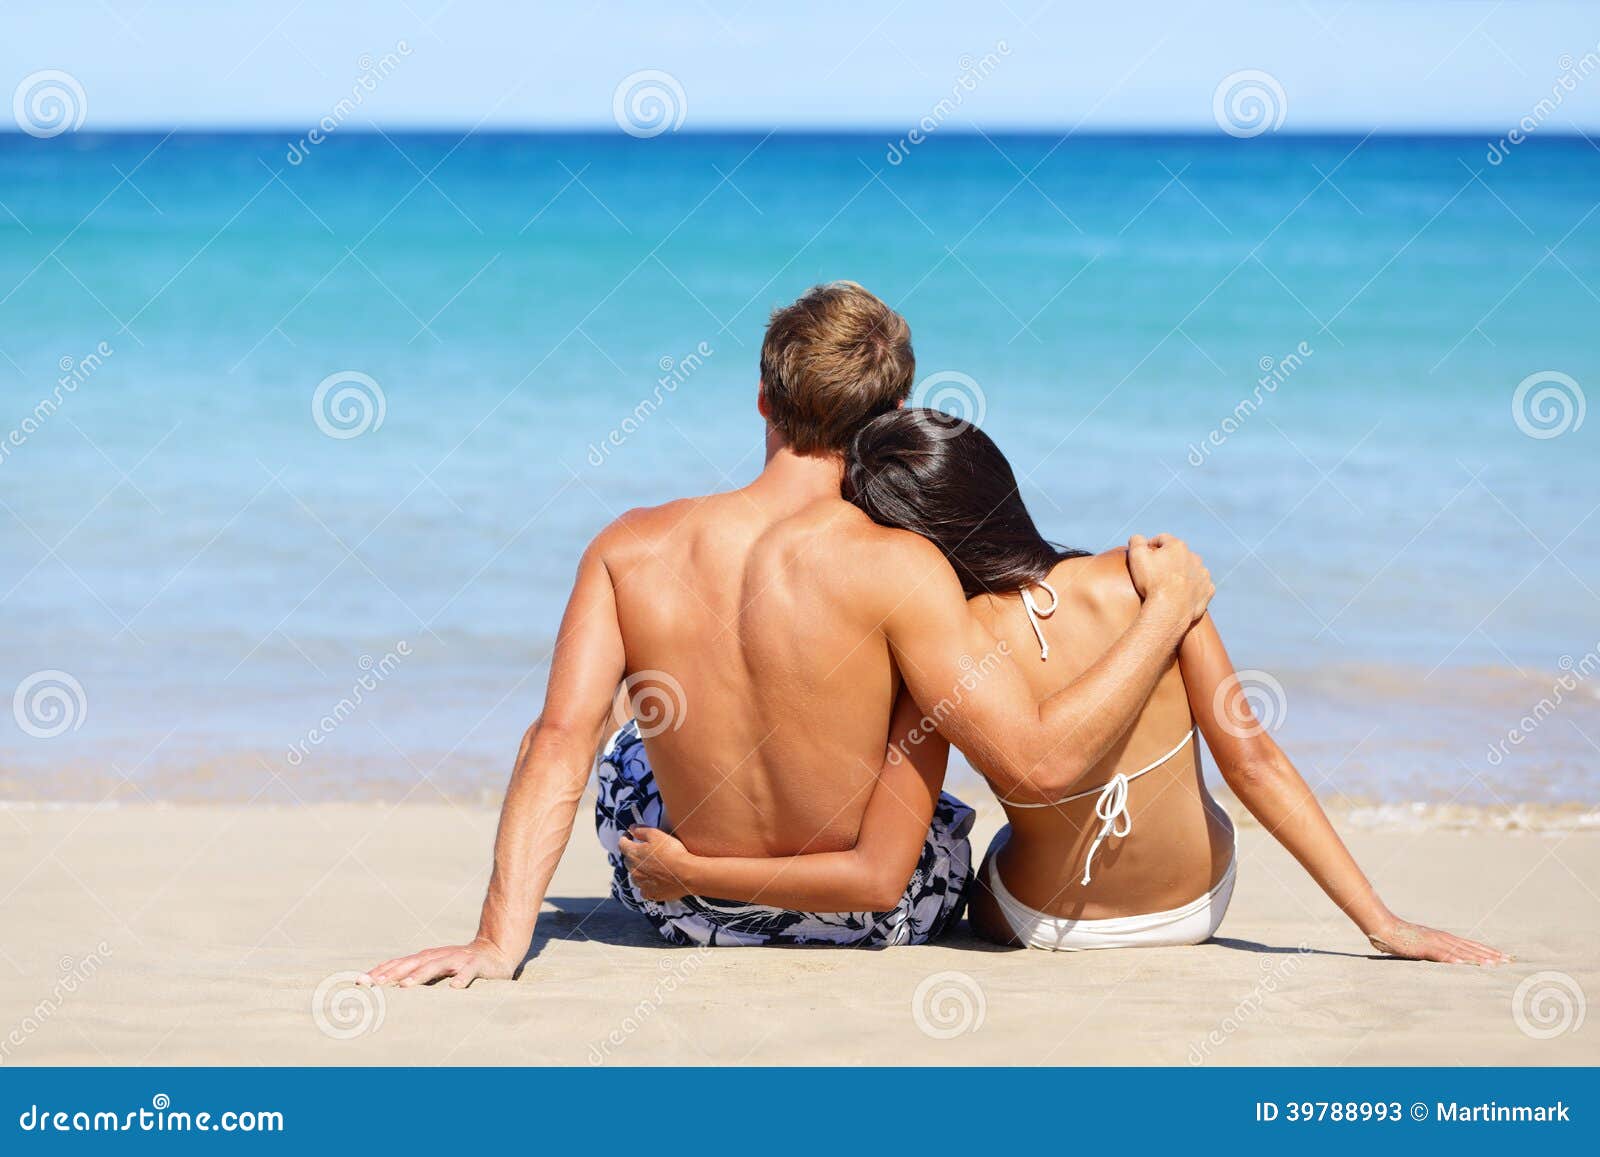 11,11 Beach Couple Relaxing Photos - Free & Royalty-Free Stock